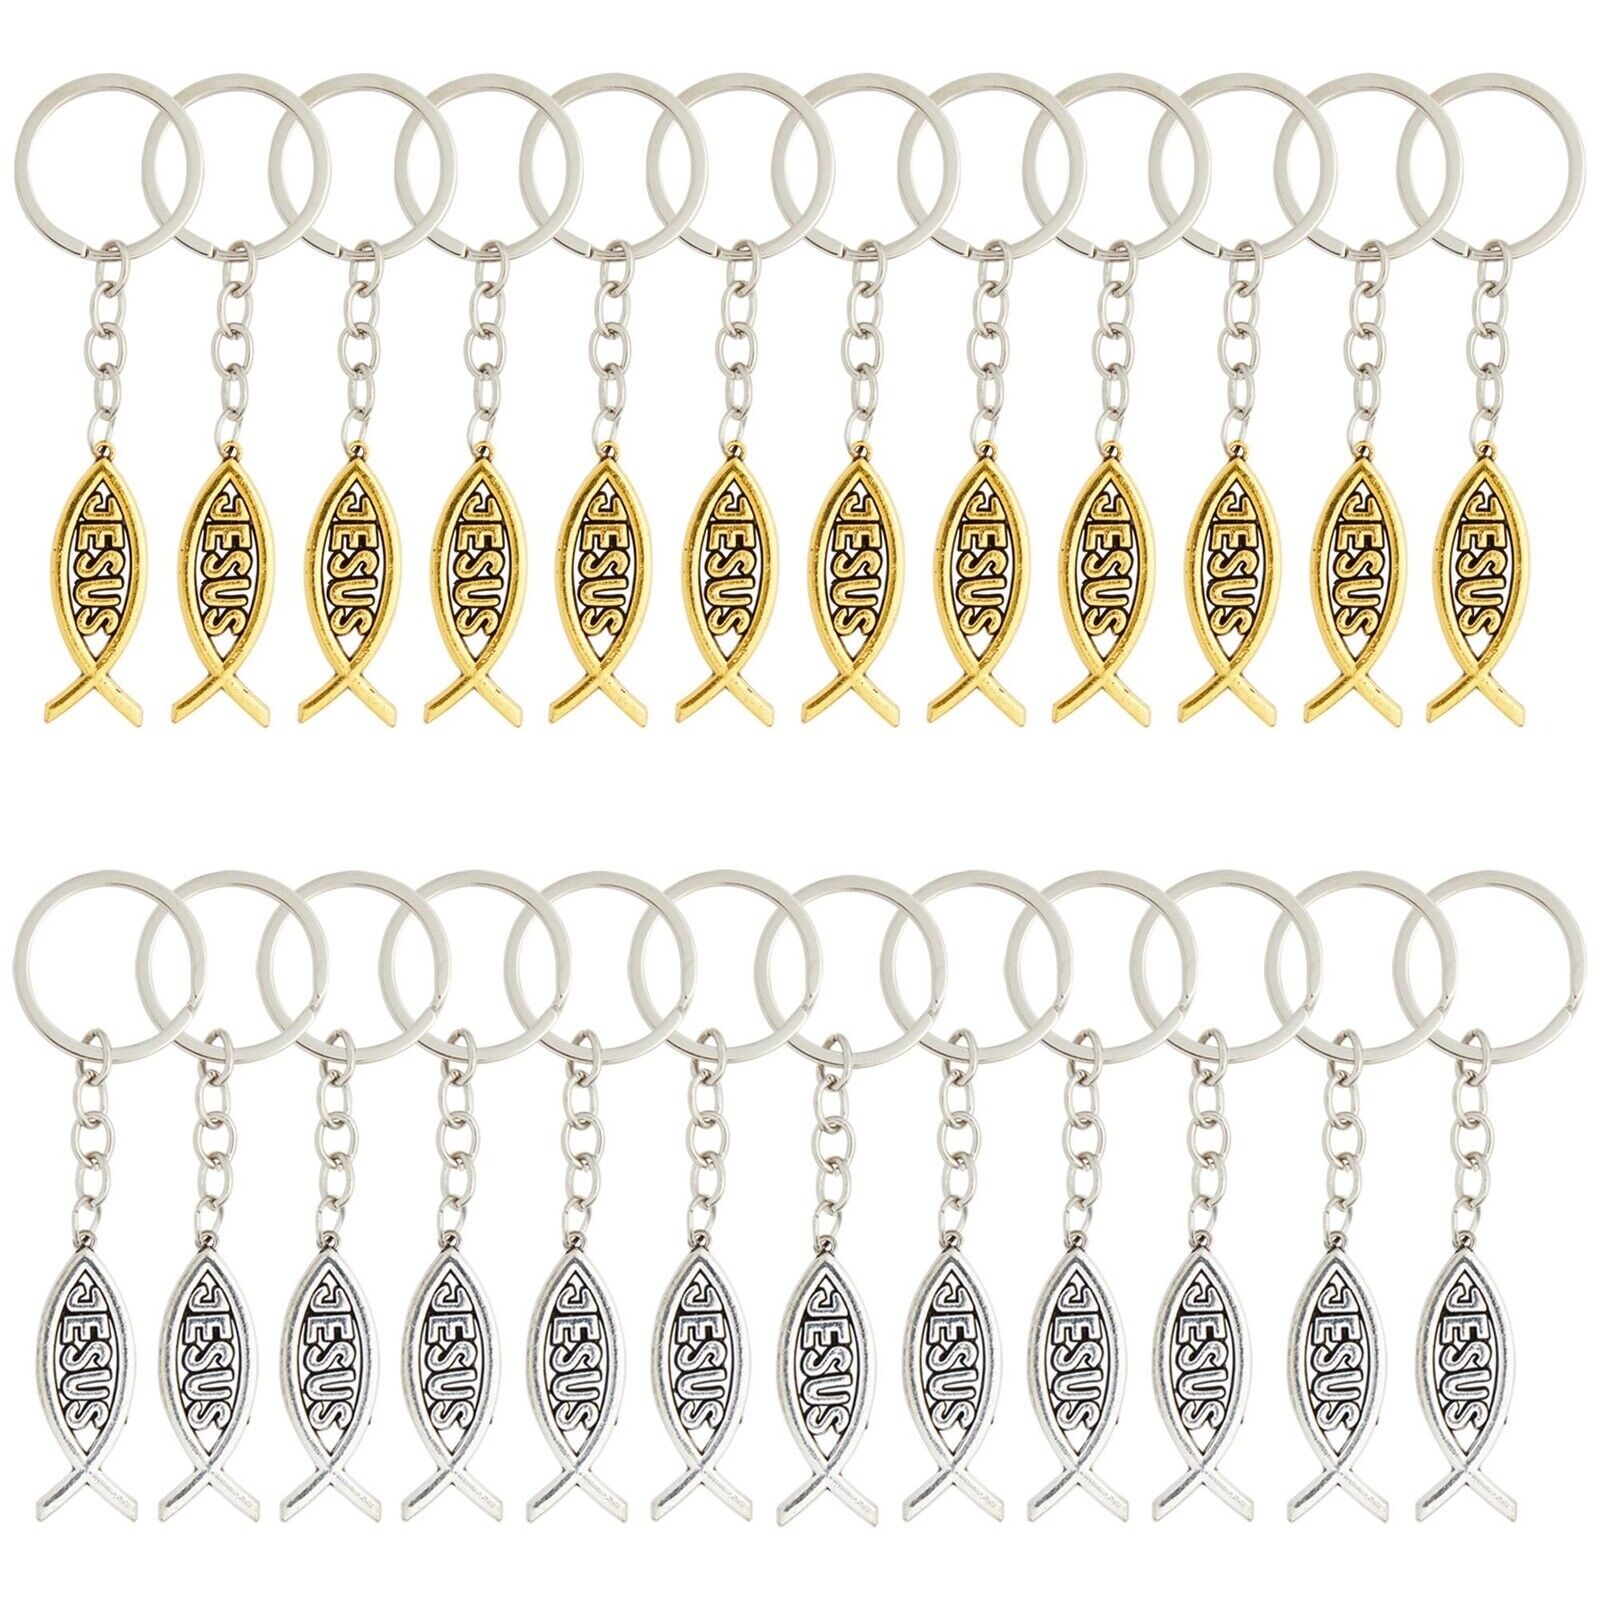 24 Pack Metal Jesus Fish Keychains, Christian Gifts, Silver and Gold-Colored